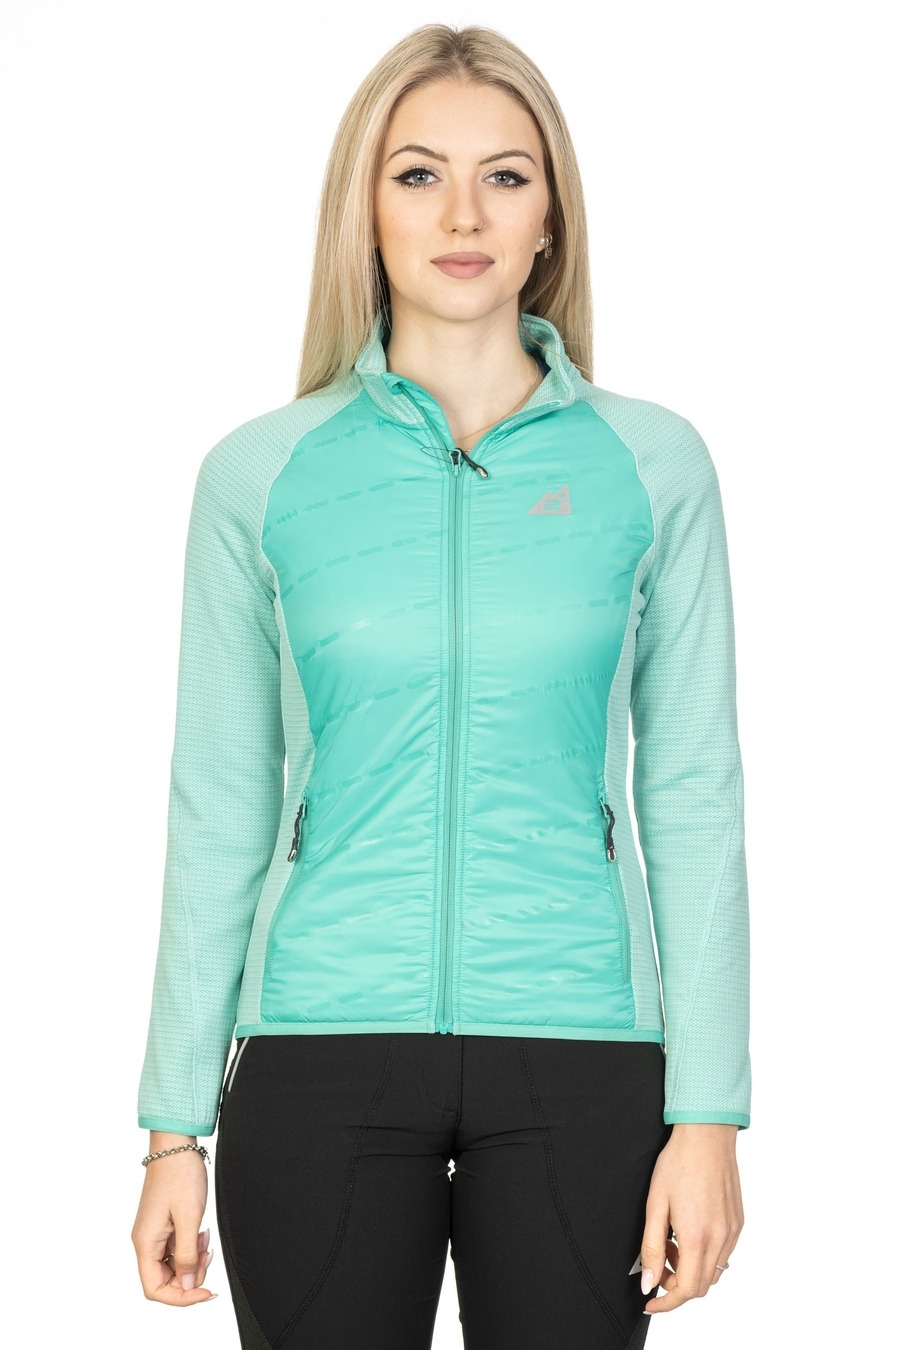 Giacca Donna Softshell Stretch Hybrid Outdoor - Trekking e Outdoor [7c2fd92d]